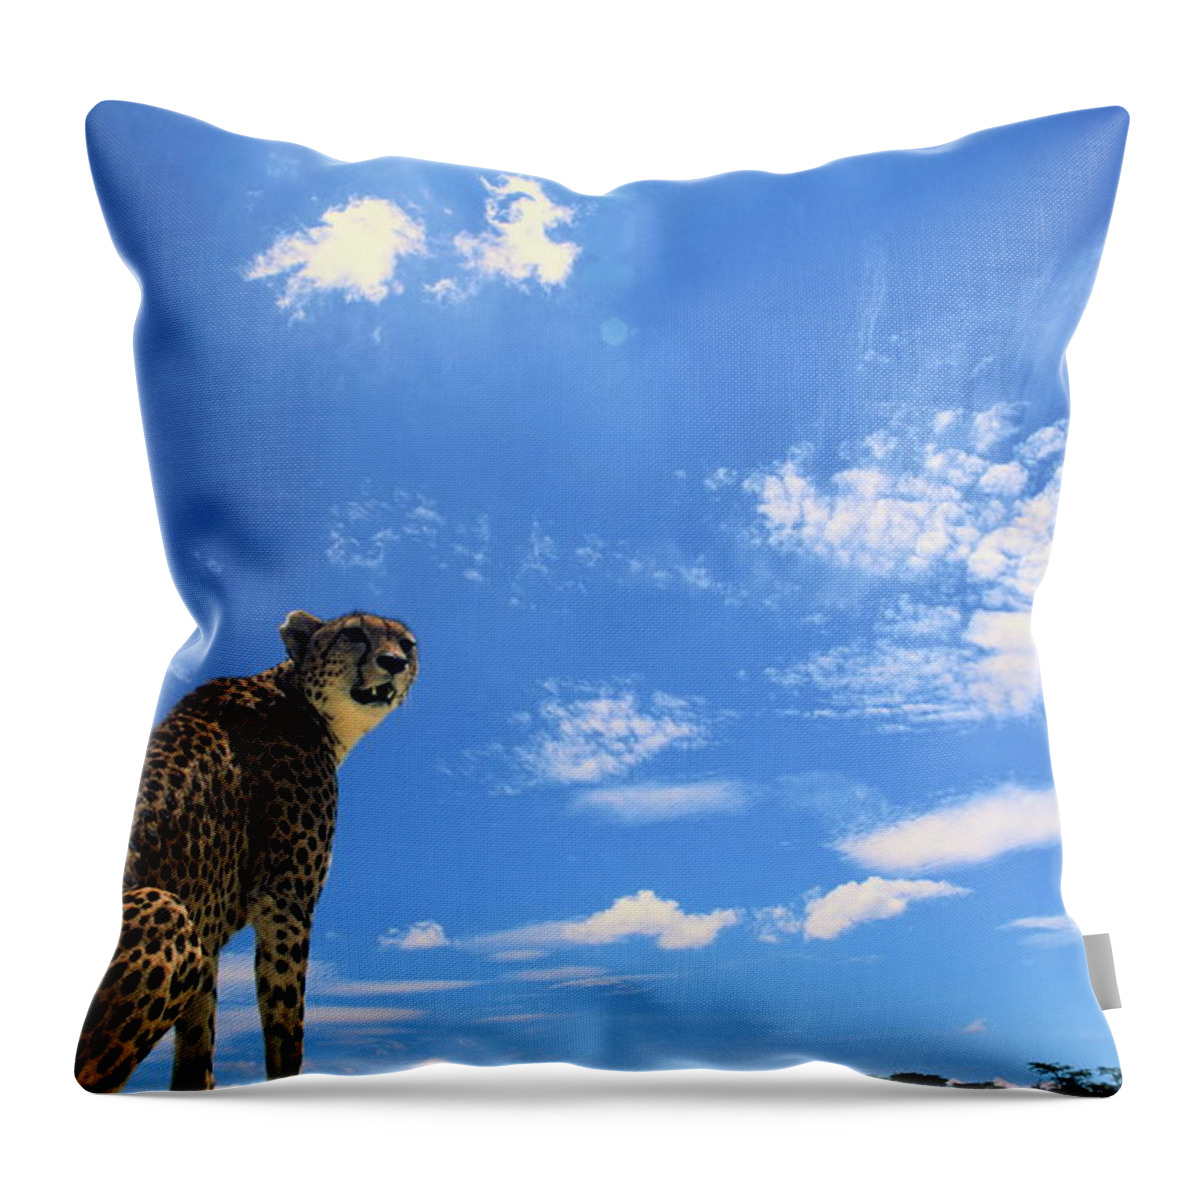 Kenya Throw Pillow featuring the photograph Cheetah Sitting, Blue Sky Background by Manoj Shah